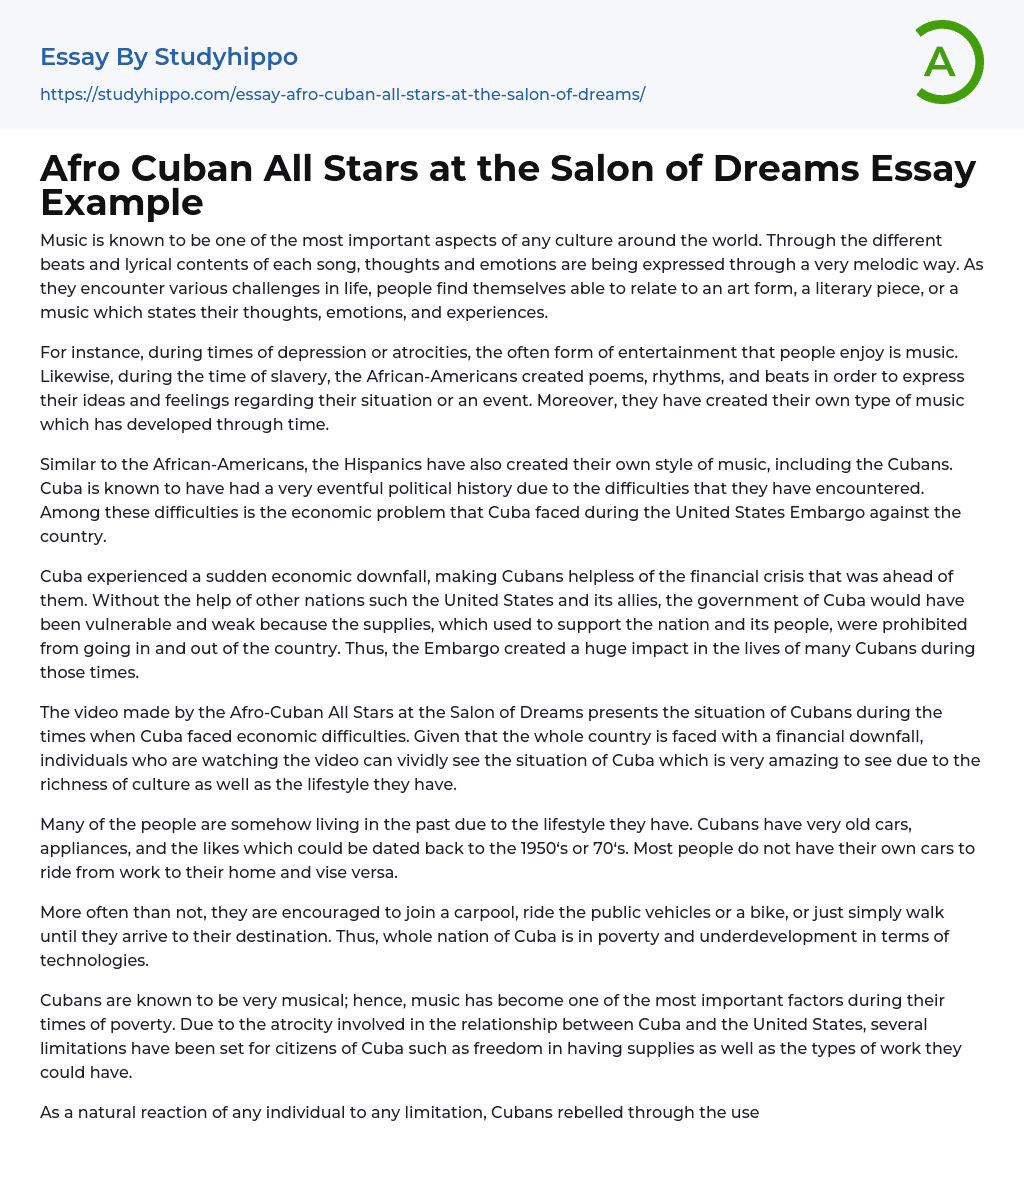 Afro Cuban All Stars at the Salon of Dreams Essay Example